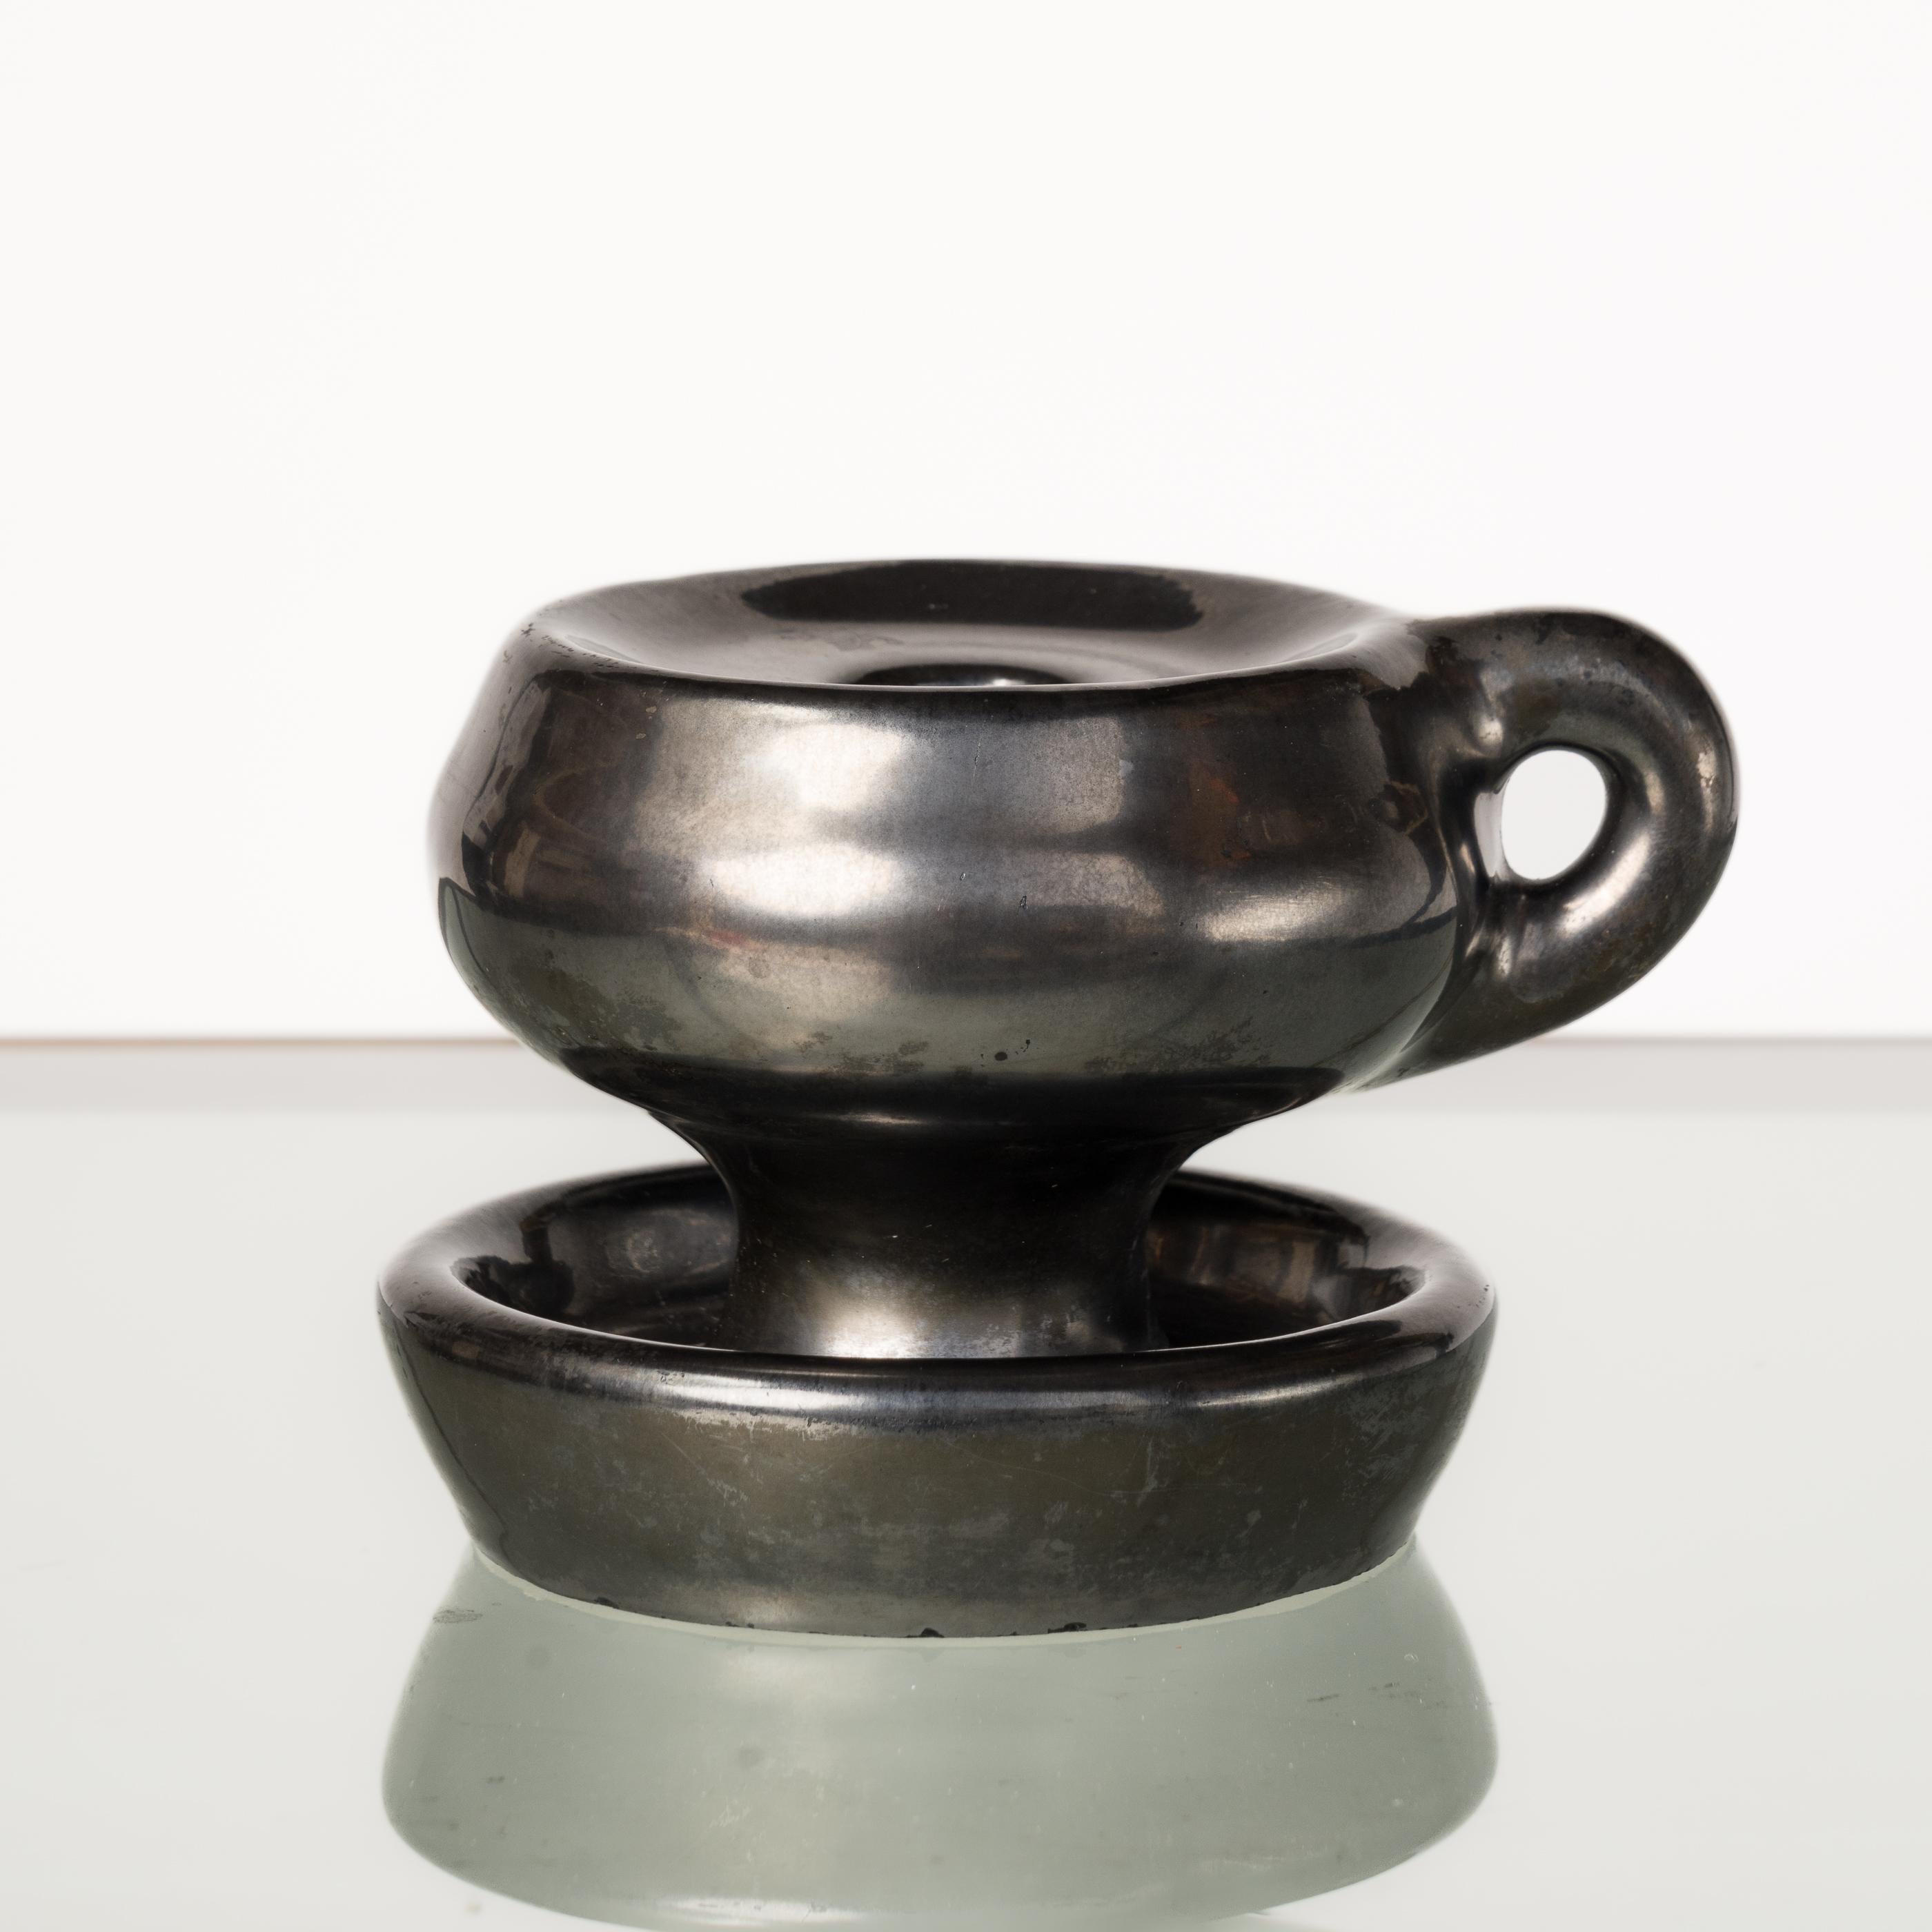 Dark glazed black ceramic candle holder in the style of Jouve. In good vintage condition. This item will ship from France and can be returned to either France or to a LIC NY location.
Price does not include shipping nor possible customs duties